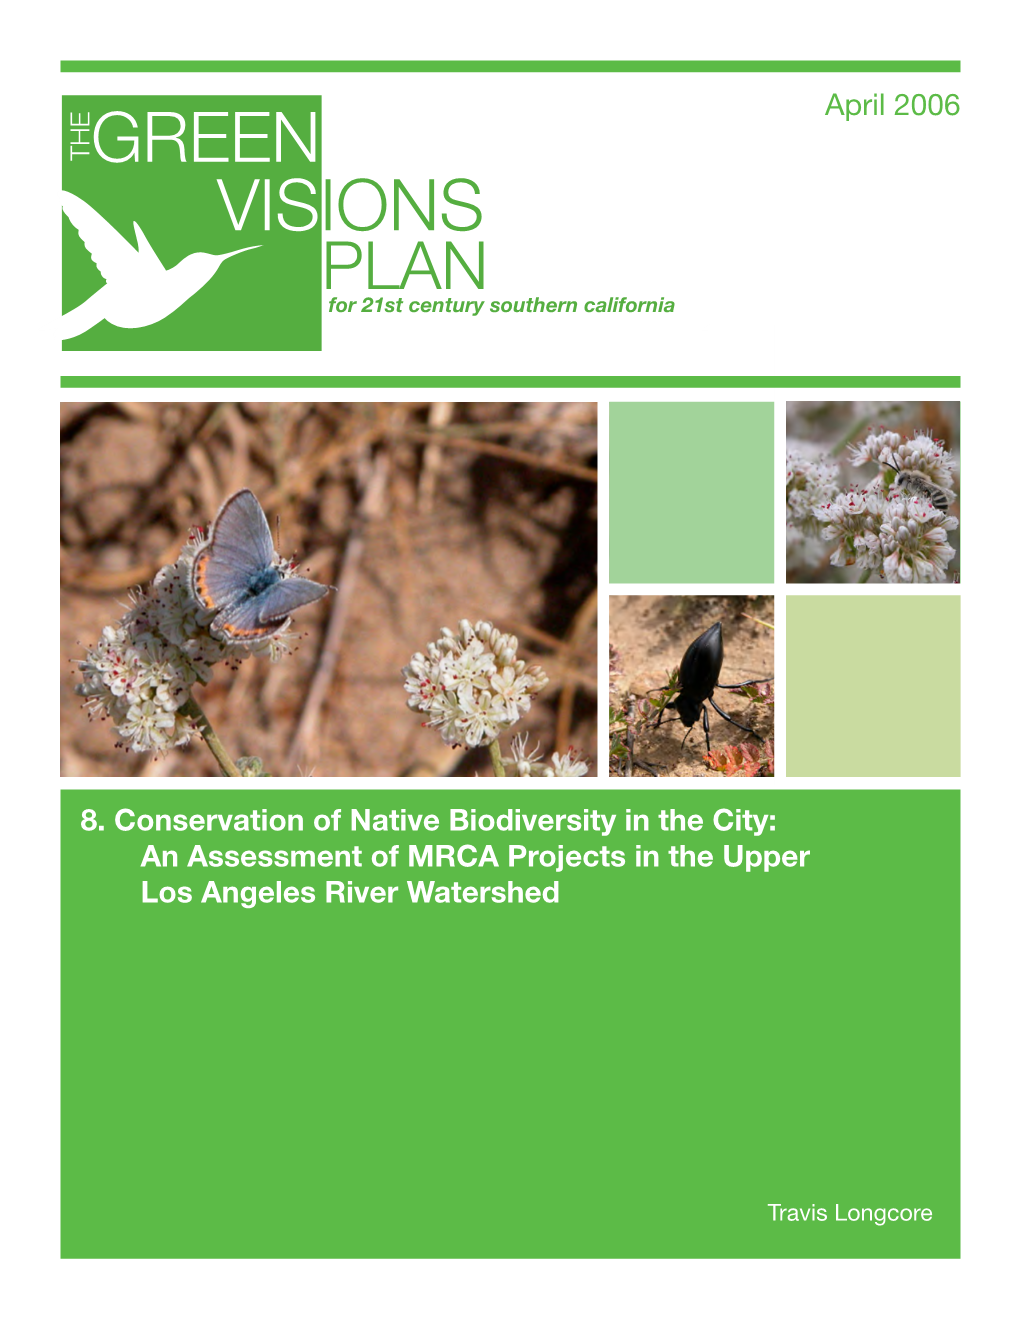 8. Conservation of Native Biodiversity in the City: an Assessment of MRCA Projects in the Upper Los Angeles River Watershed